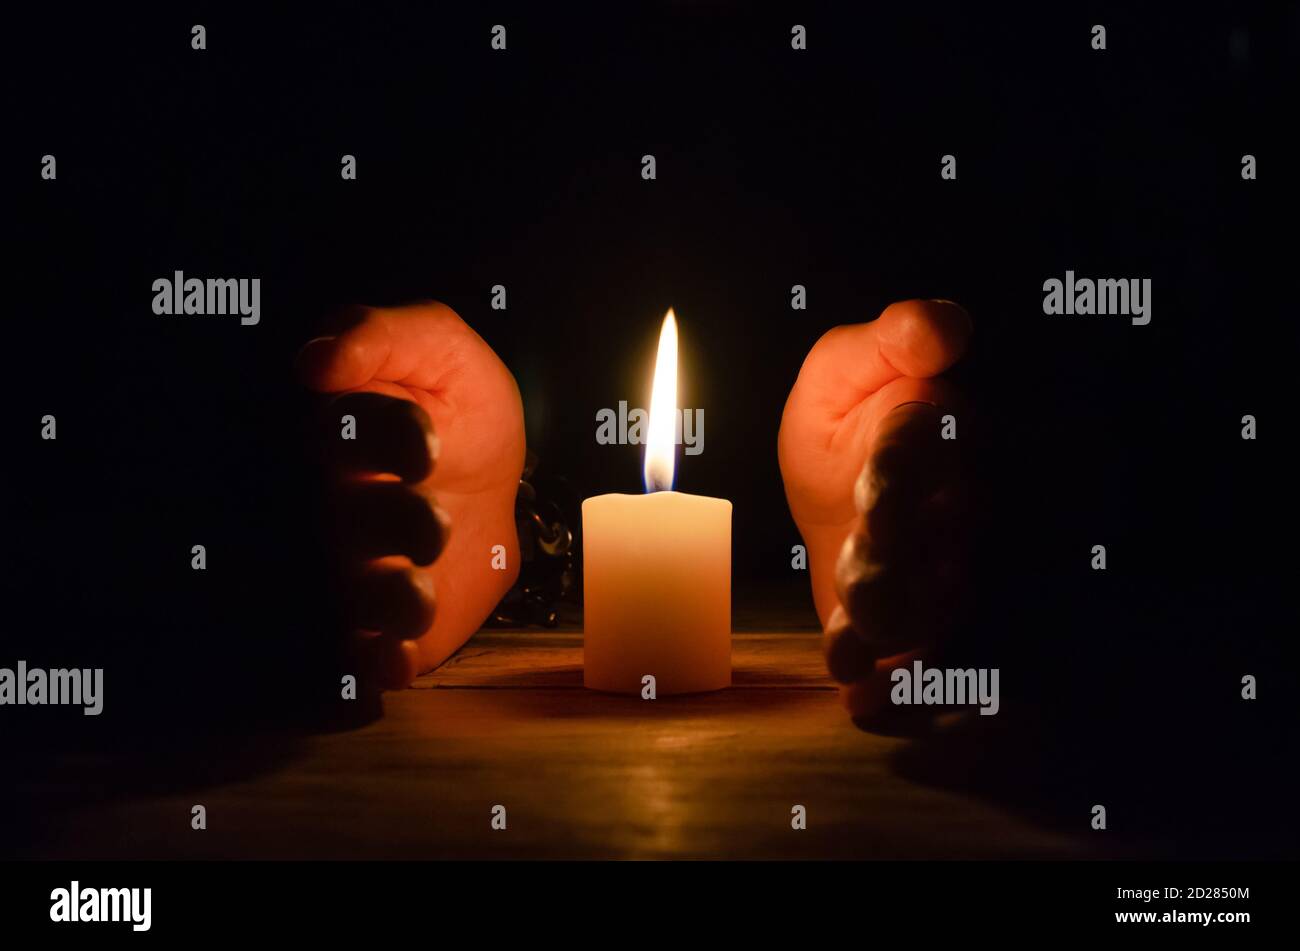 Hands wrapped around a large candle close-up, copy space Stock Photo